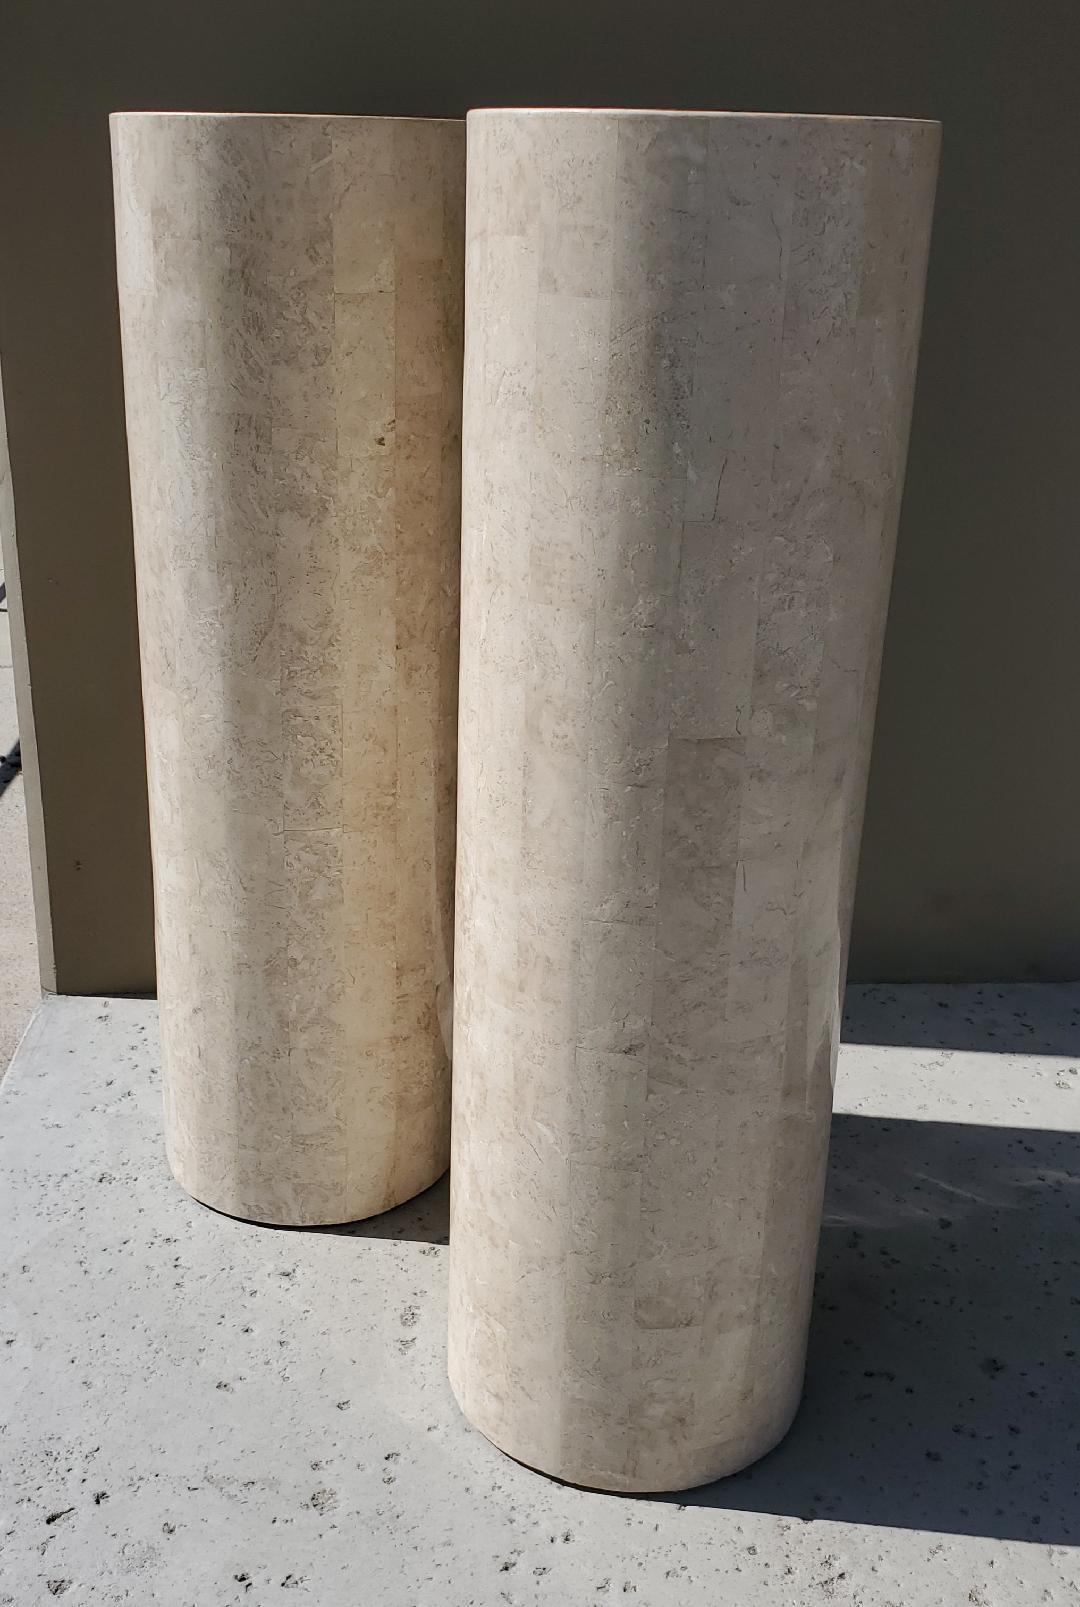 Marquis Collection of Beverly Hills, 1980s Round Tessellated Stone Pedestals 2 10